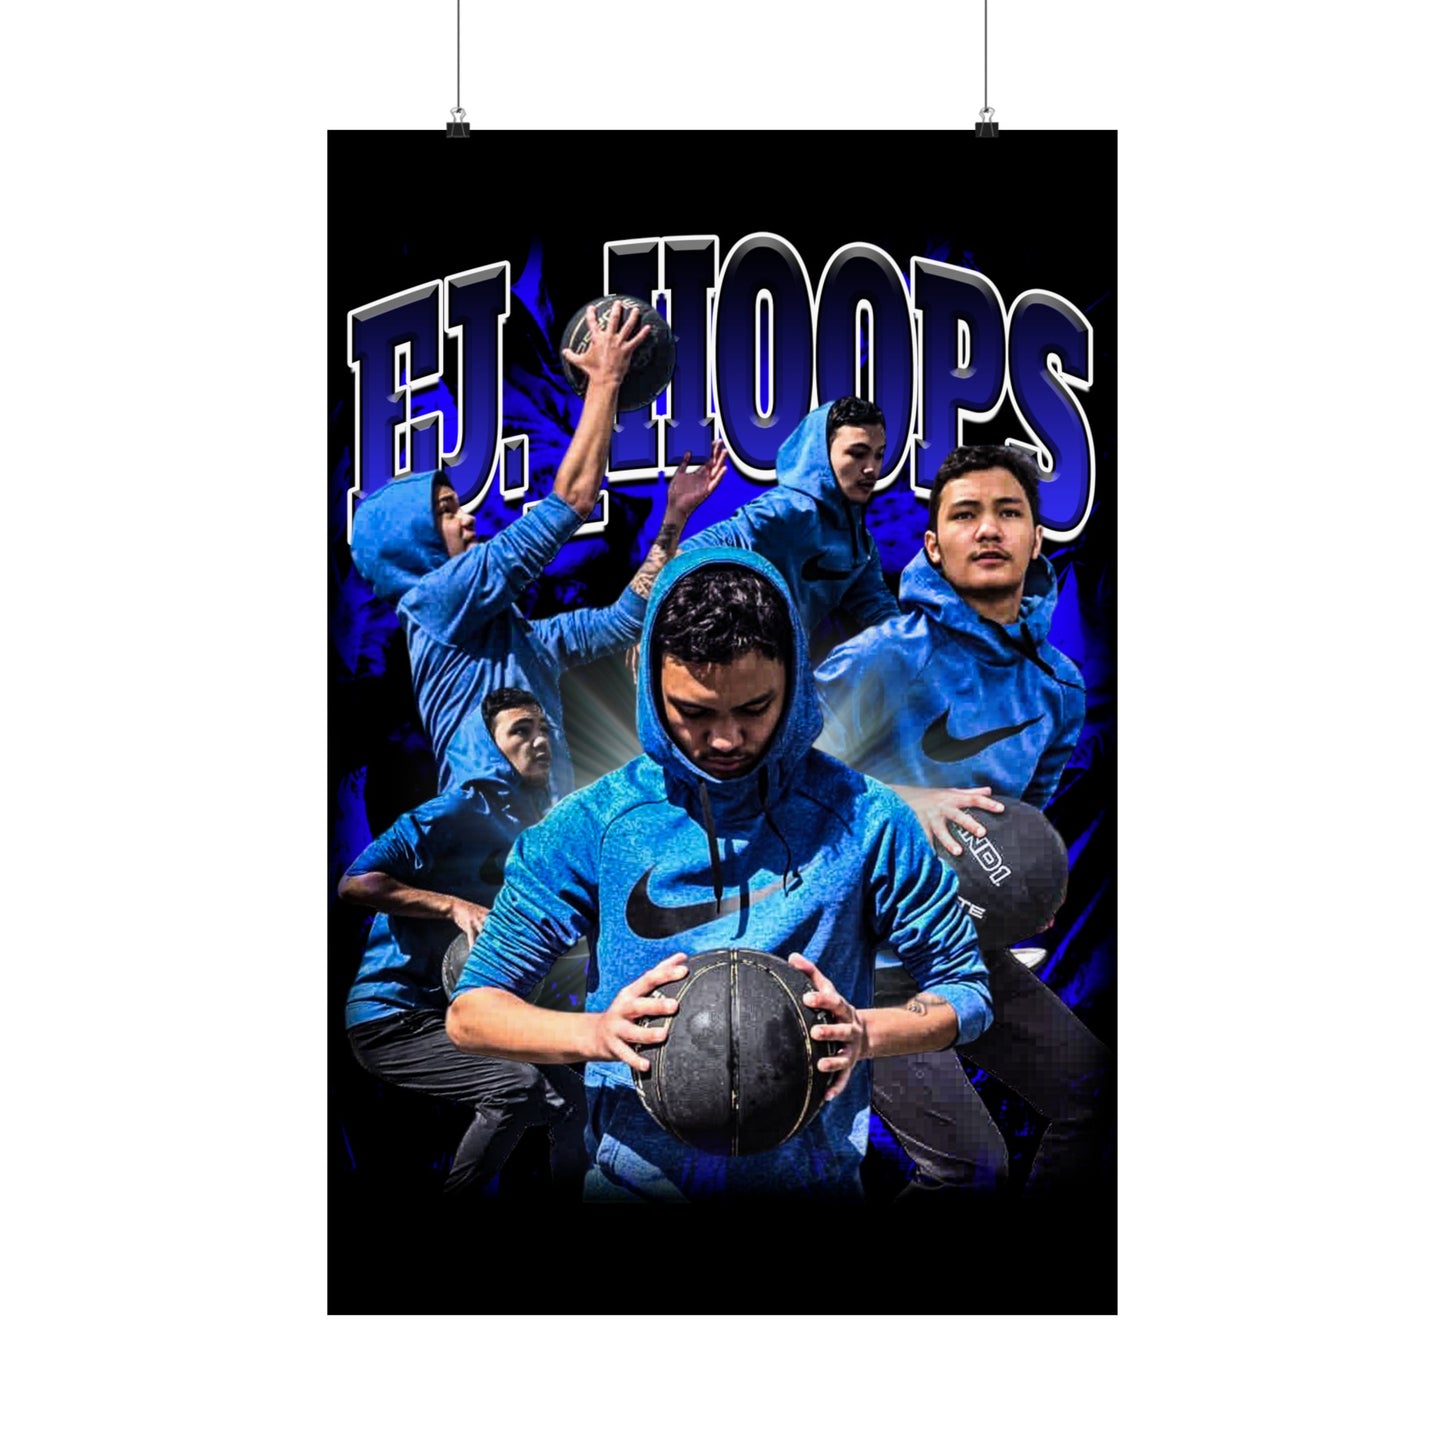 Ej Hoops Poster 24" x 36"